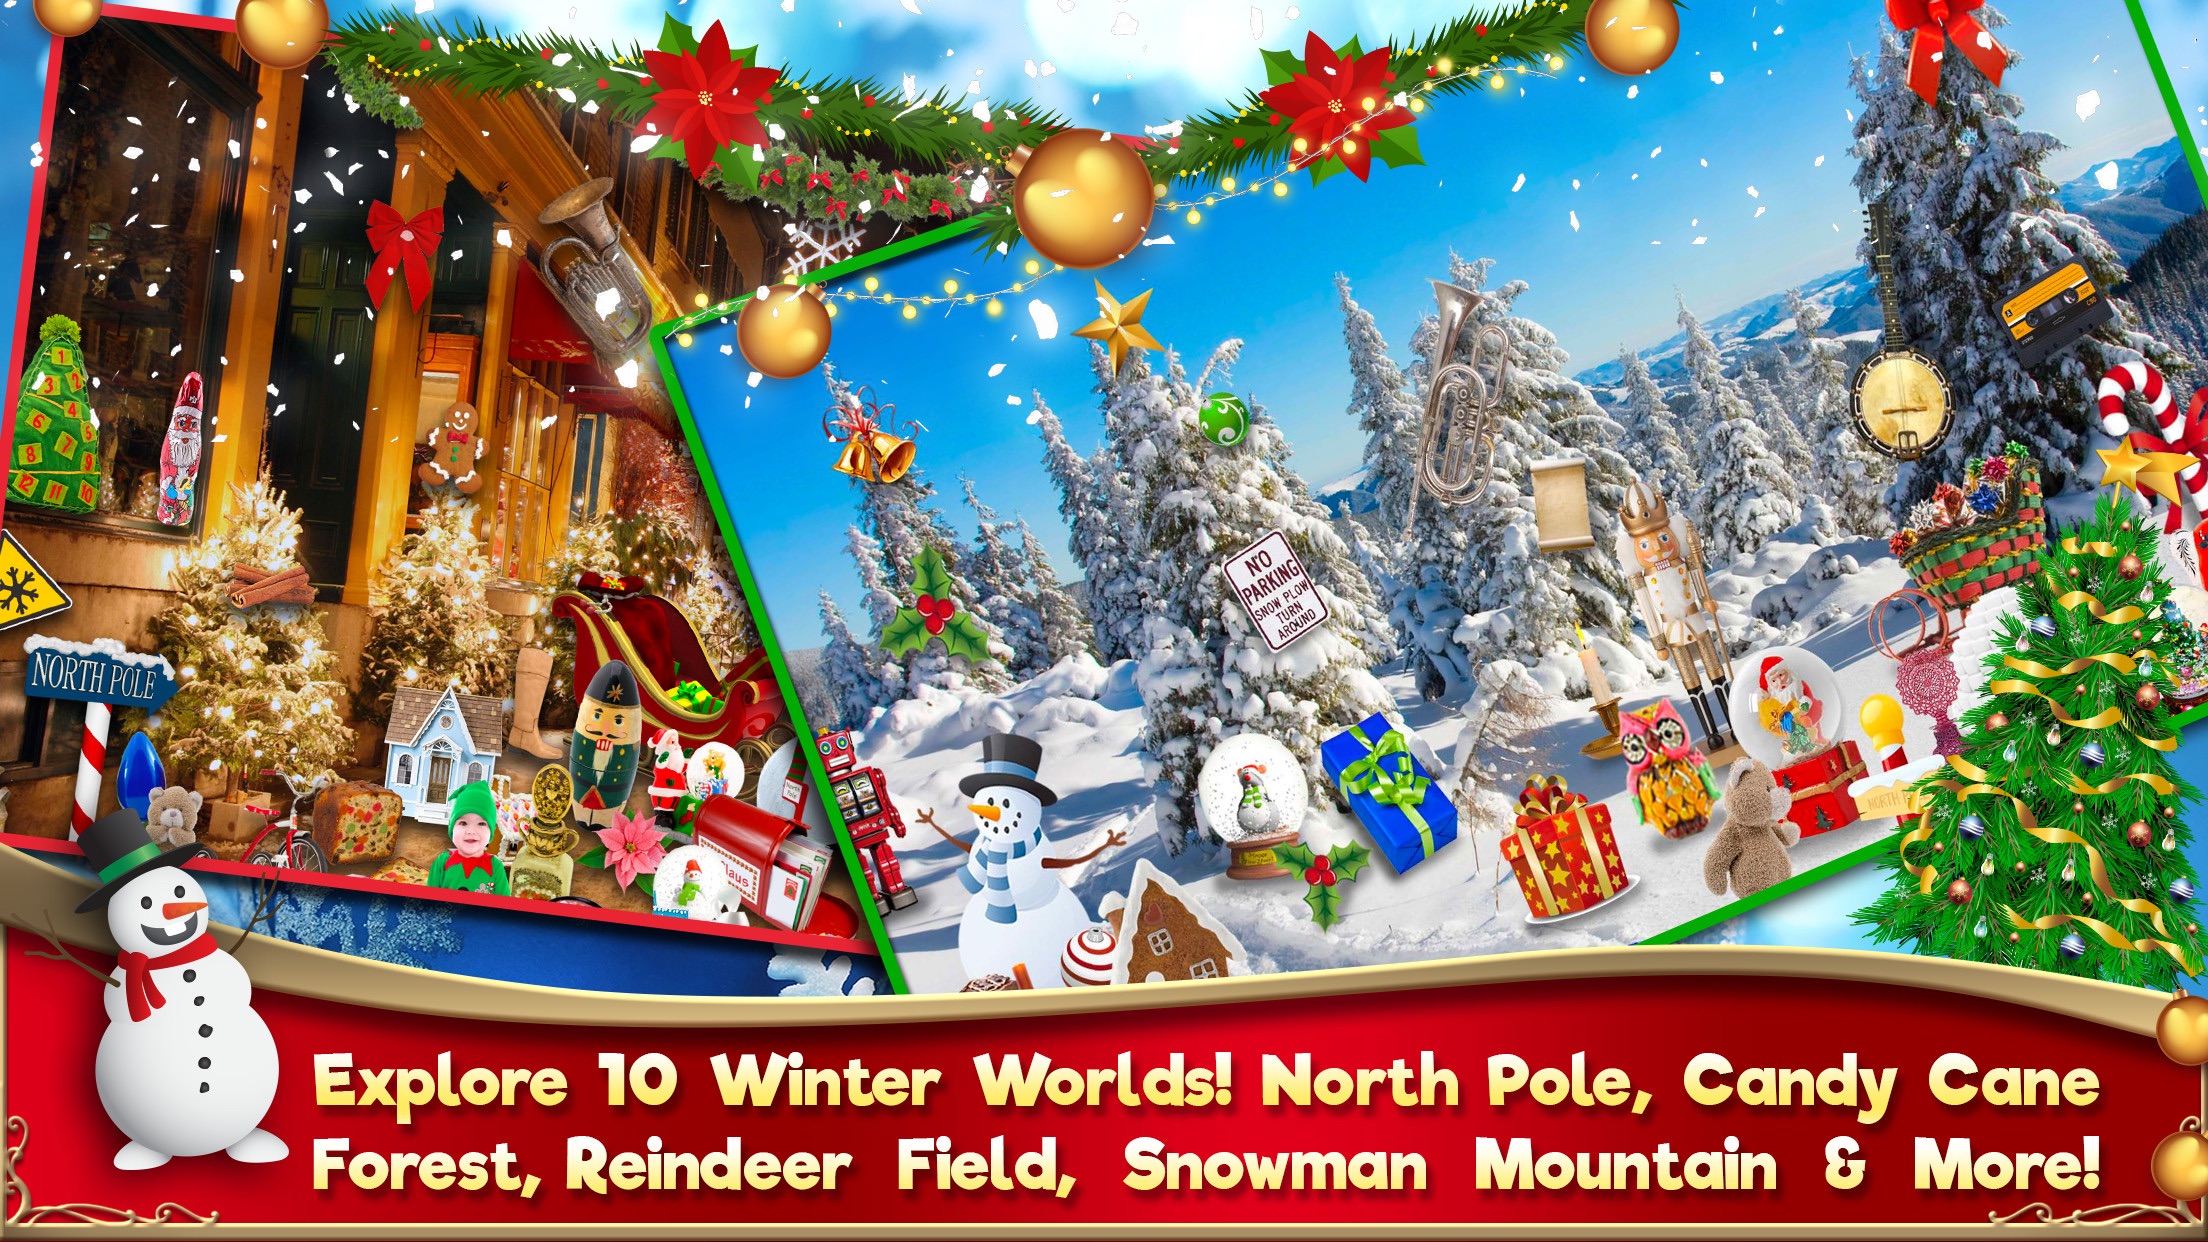 Hidden Objects Travel Adventure and Holiday Quest - Seek & Find Object Puzzle Gameのおすすめ画像1